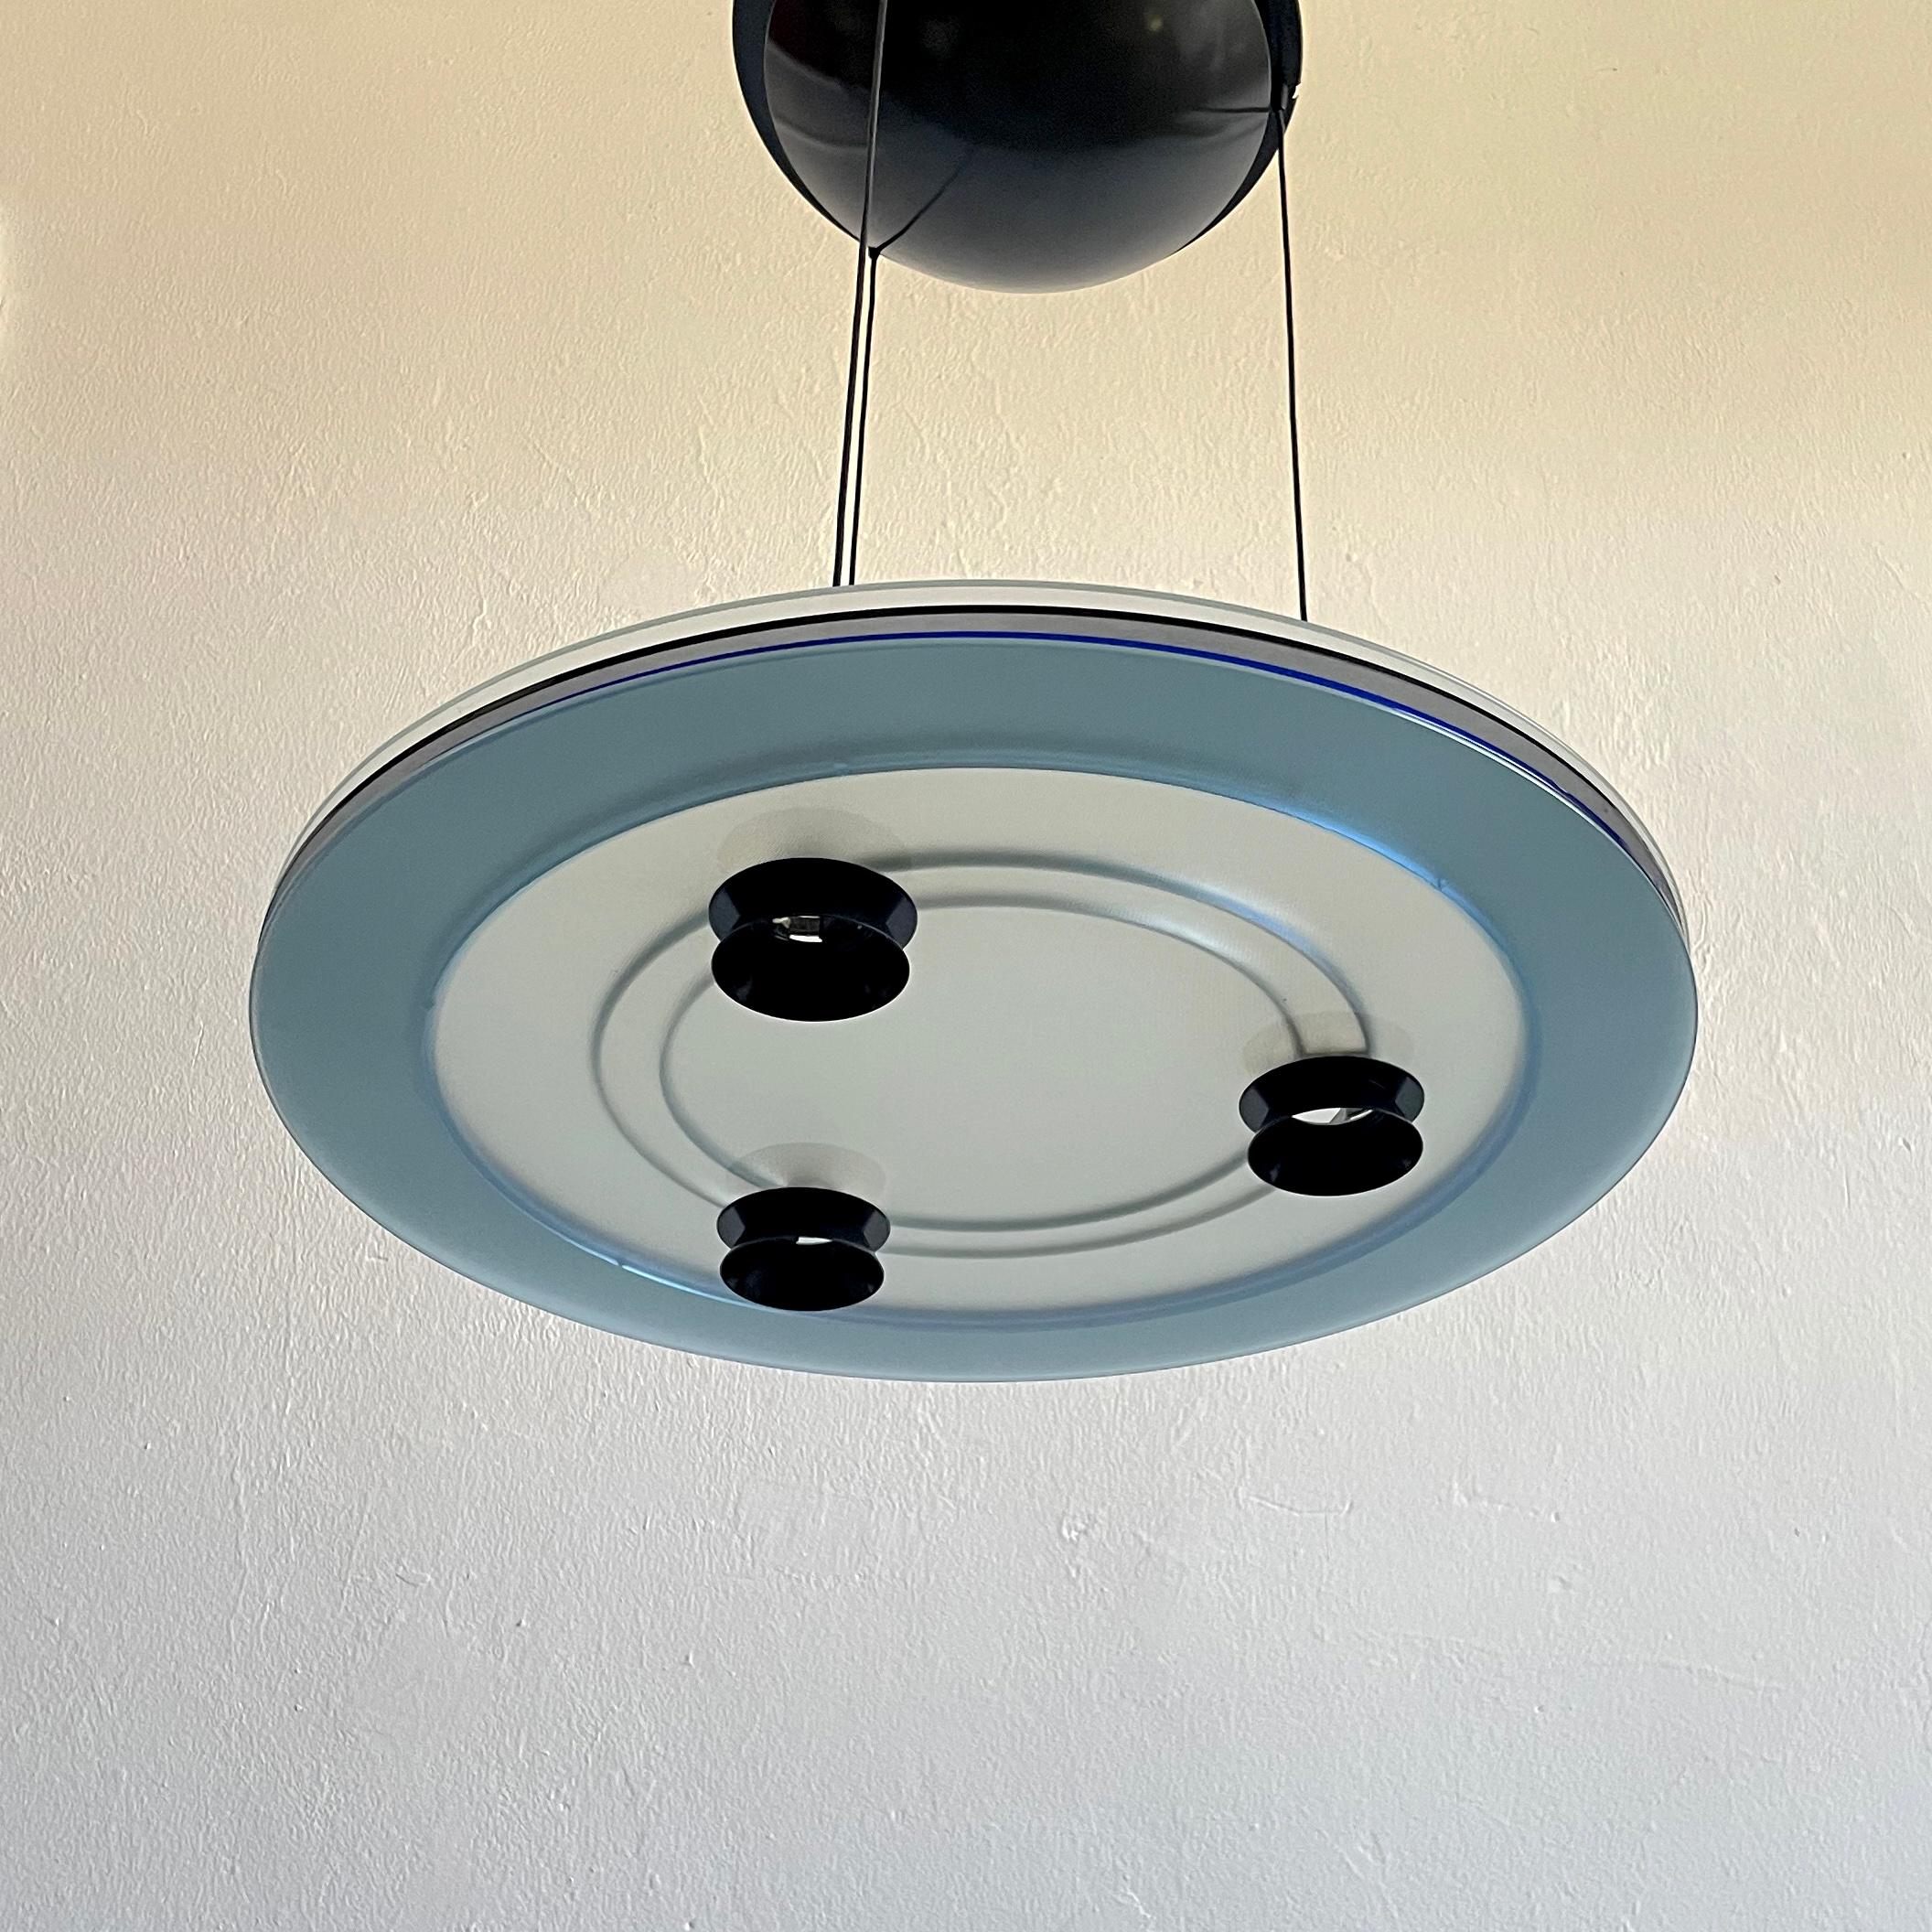 The postmodern halogen 'Aurora' chandelier light was designed by Perry King and Santiago Miranda for Arteluce in the 1980s. 
The chandelier is made of tempered glass with two acrylic transparent blue outer rings placed between. The lamp has three